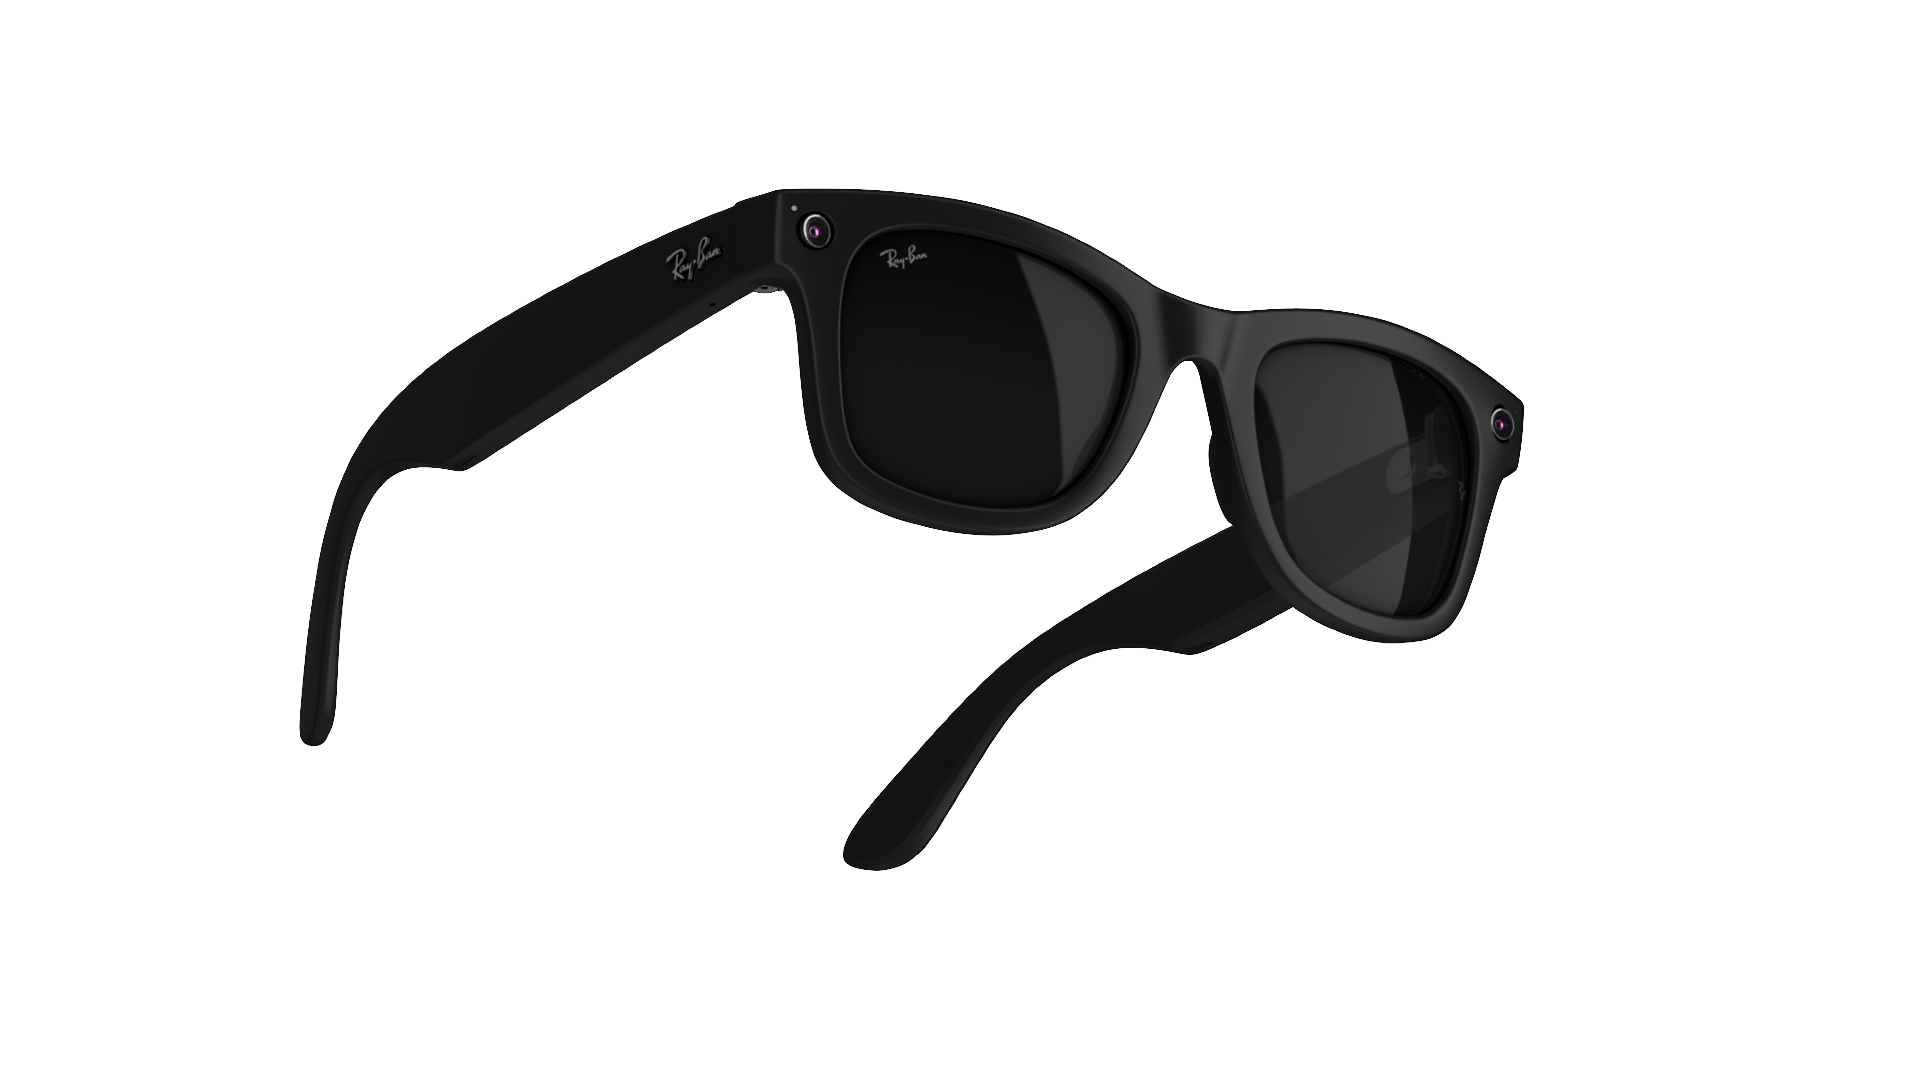 Meta Ray-Ban Stories Glasses Can Now Send Texts and More